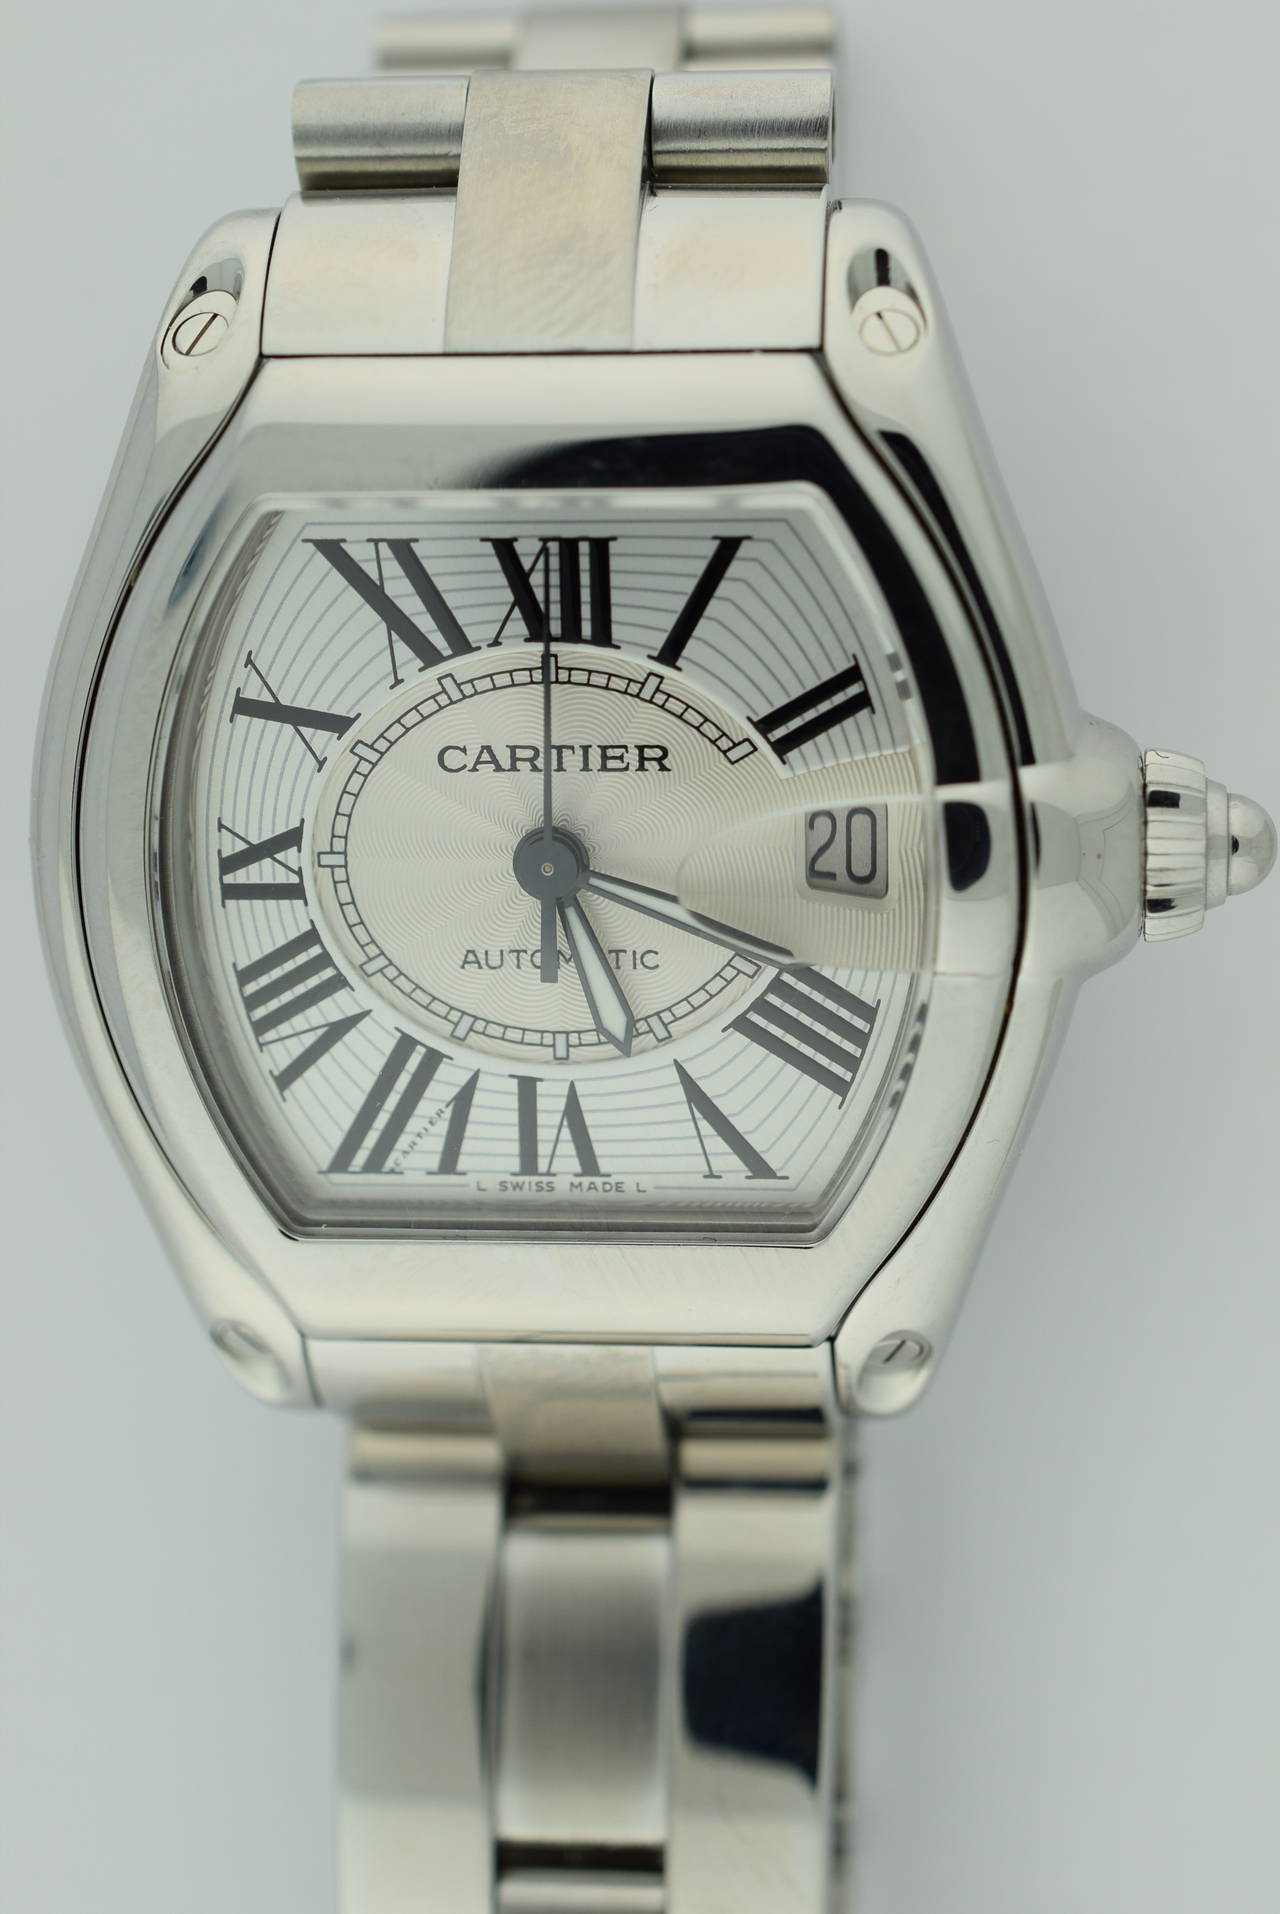 Cartier automatic men's Roadster in stainless steel case and band. 38.5mm diameter size. Case thickness 12mm. Band width 19mm. Band is fully linked. Comes with original box and Cartier instruction manuals. Circa 2007-2010. Roman numeral dial with